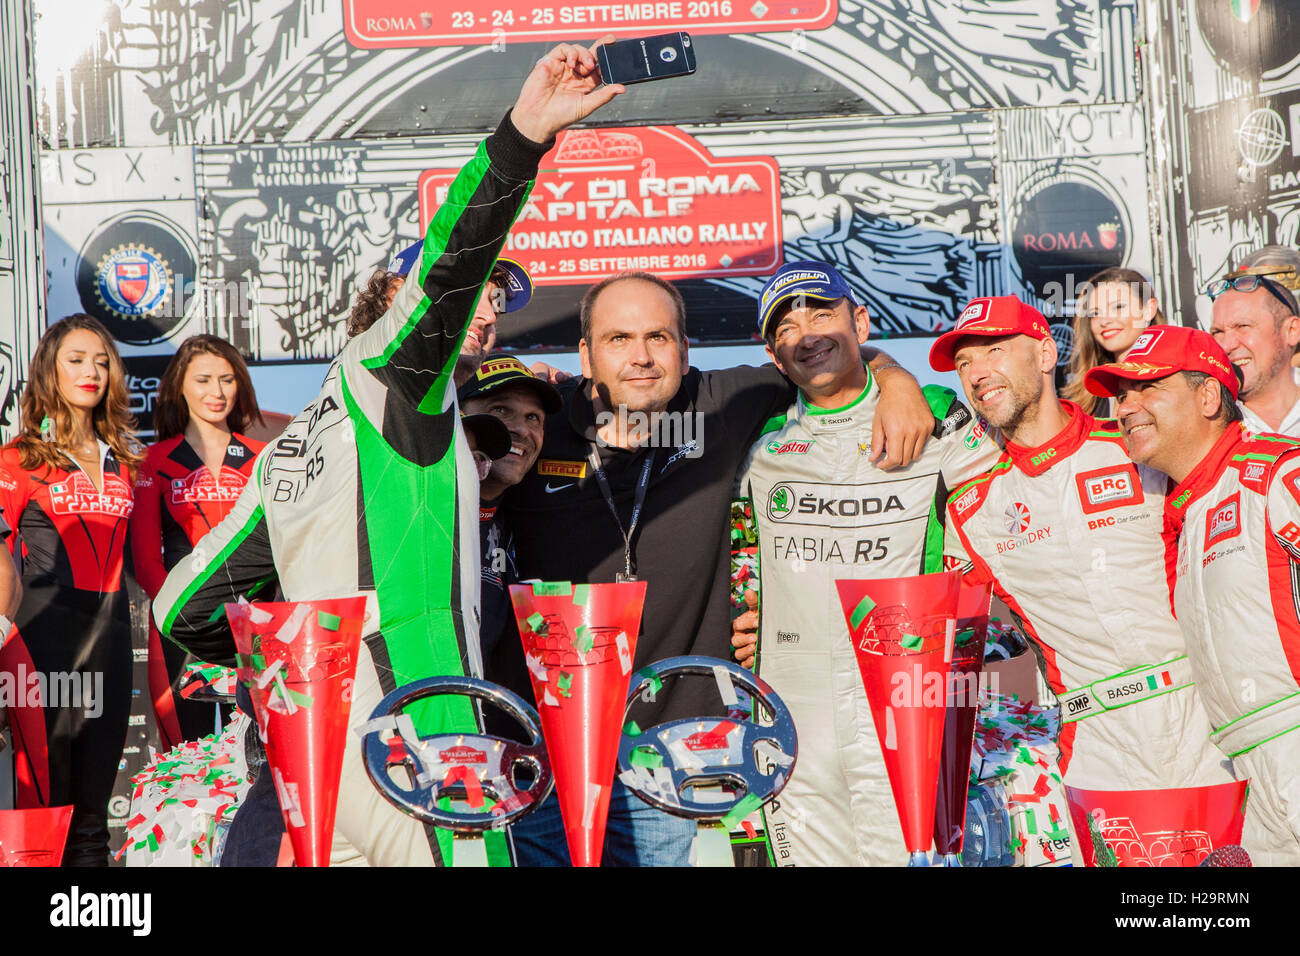 awarding of the winners of the Rally of Roma Capitale 2016 Stock Photo